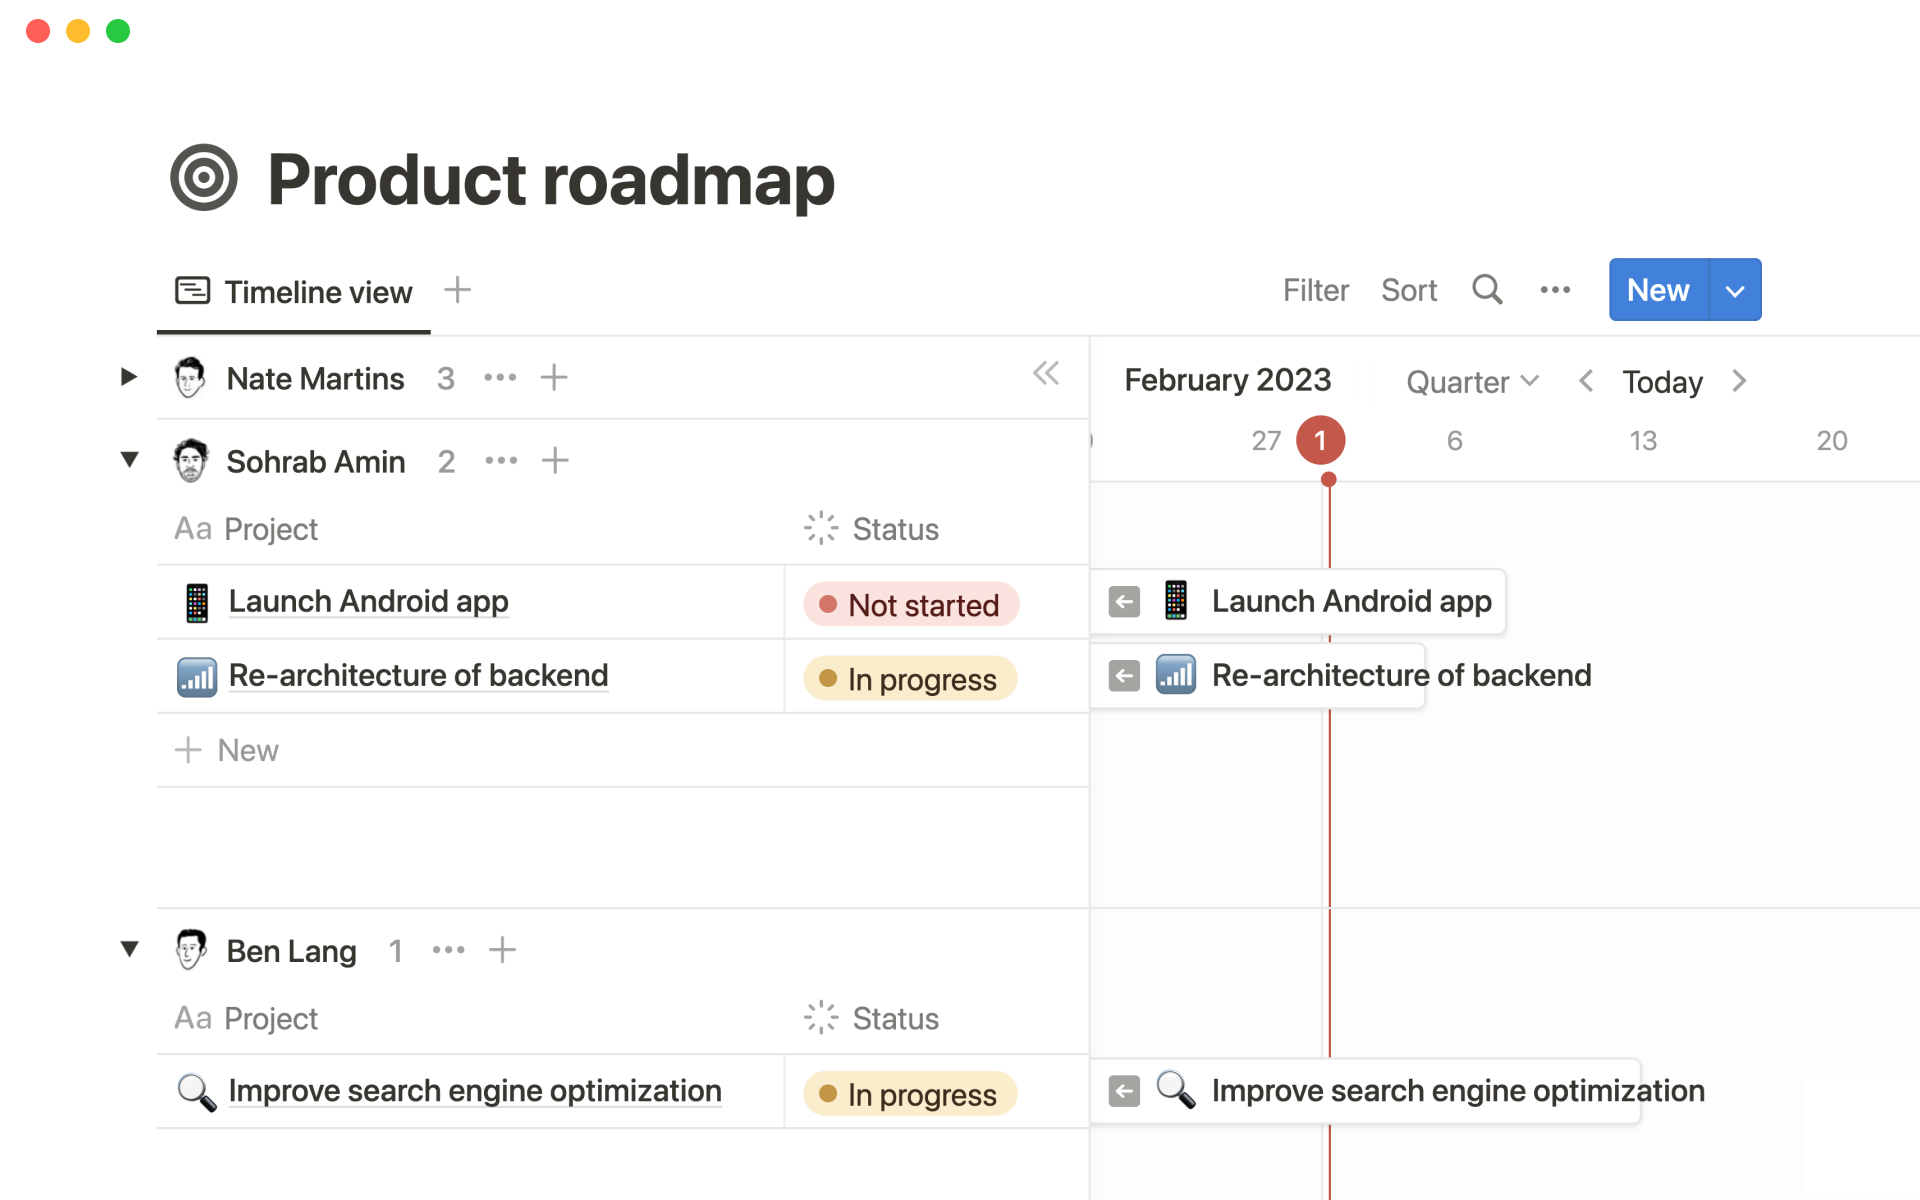 Consolidate all your product team’s docs and enable cross-functional collaboration.